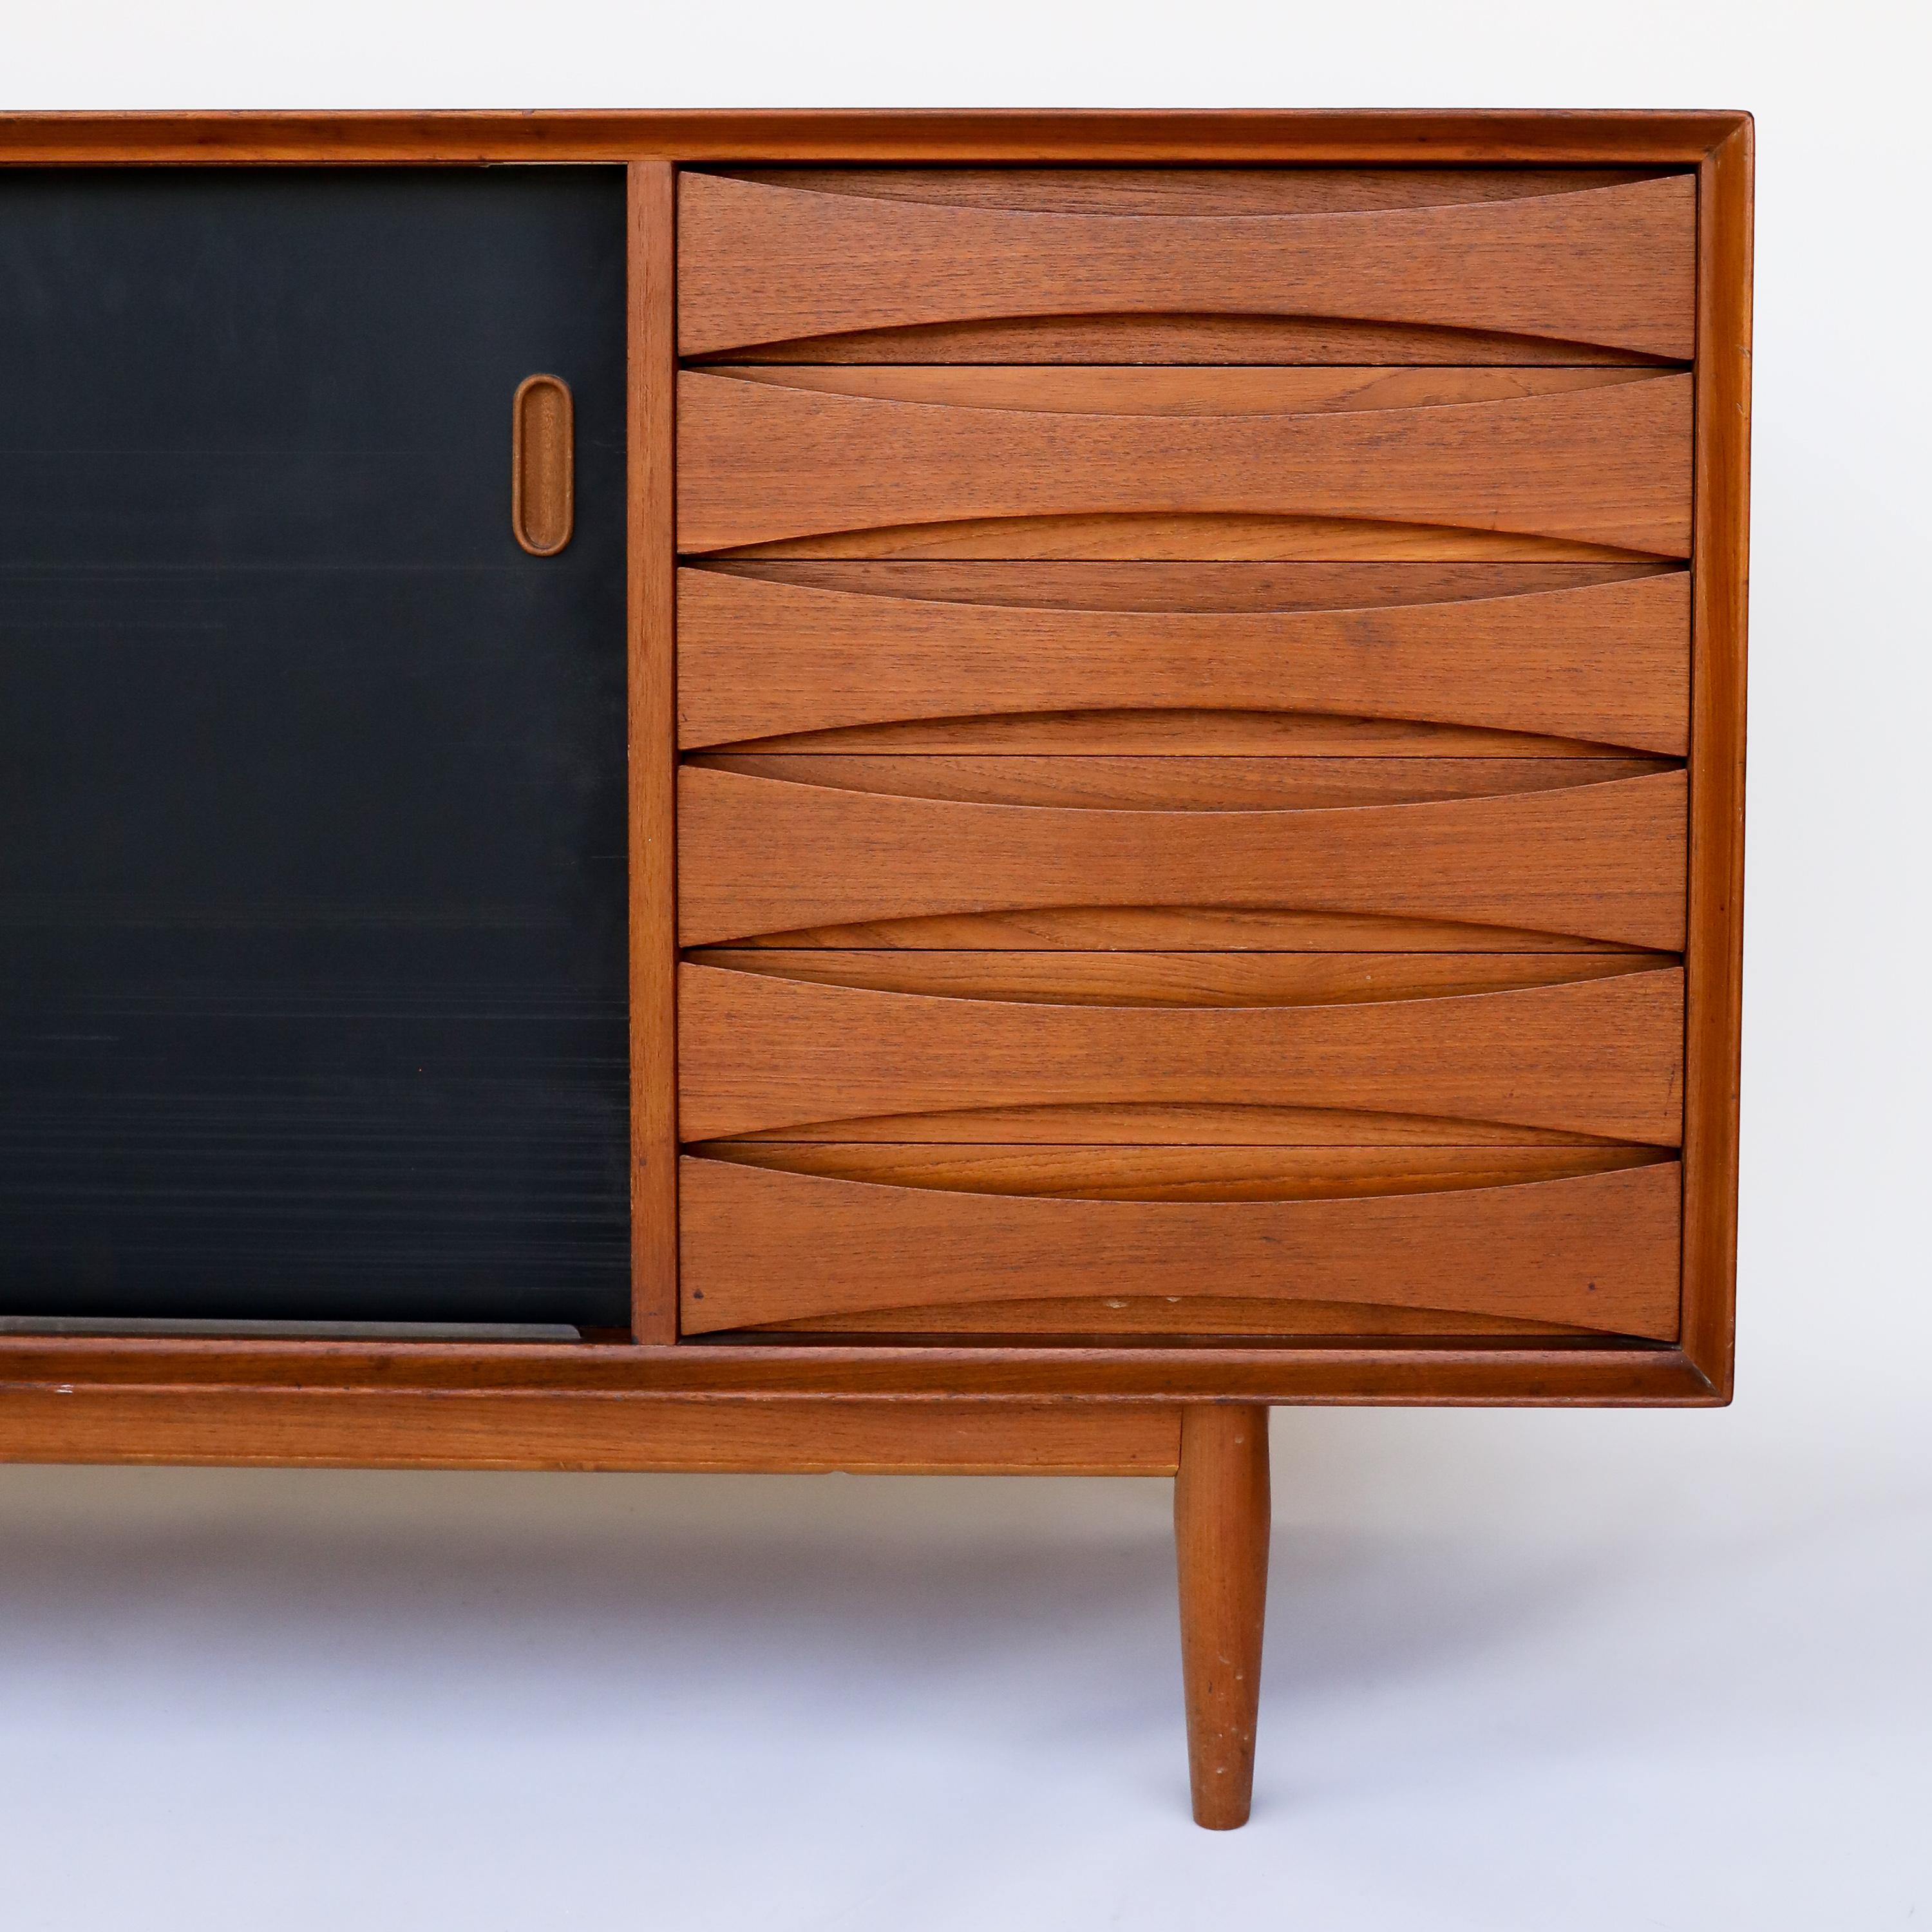 This is the iconic credenza Model 29, designed by Arne Vodder for Sibast. The doors are reversible with matte black lacquer on one side and teak on the other. 

The Model 29 sideboard has 6 drawers and 2 adjustable shelves behind 2 sliding doors.